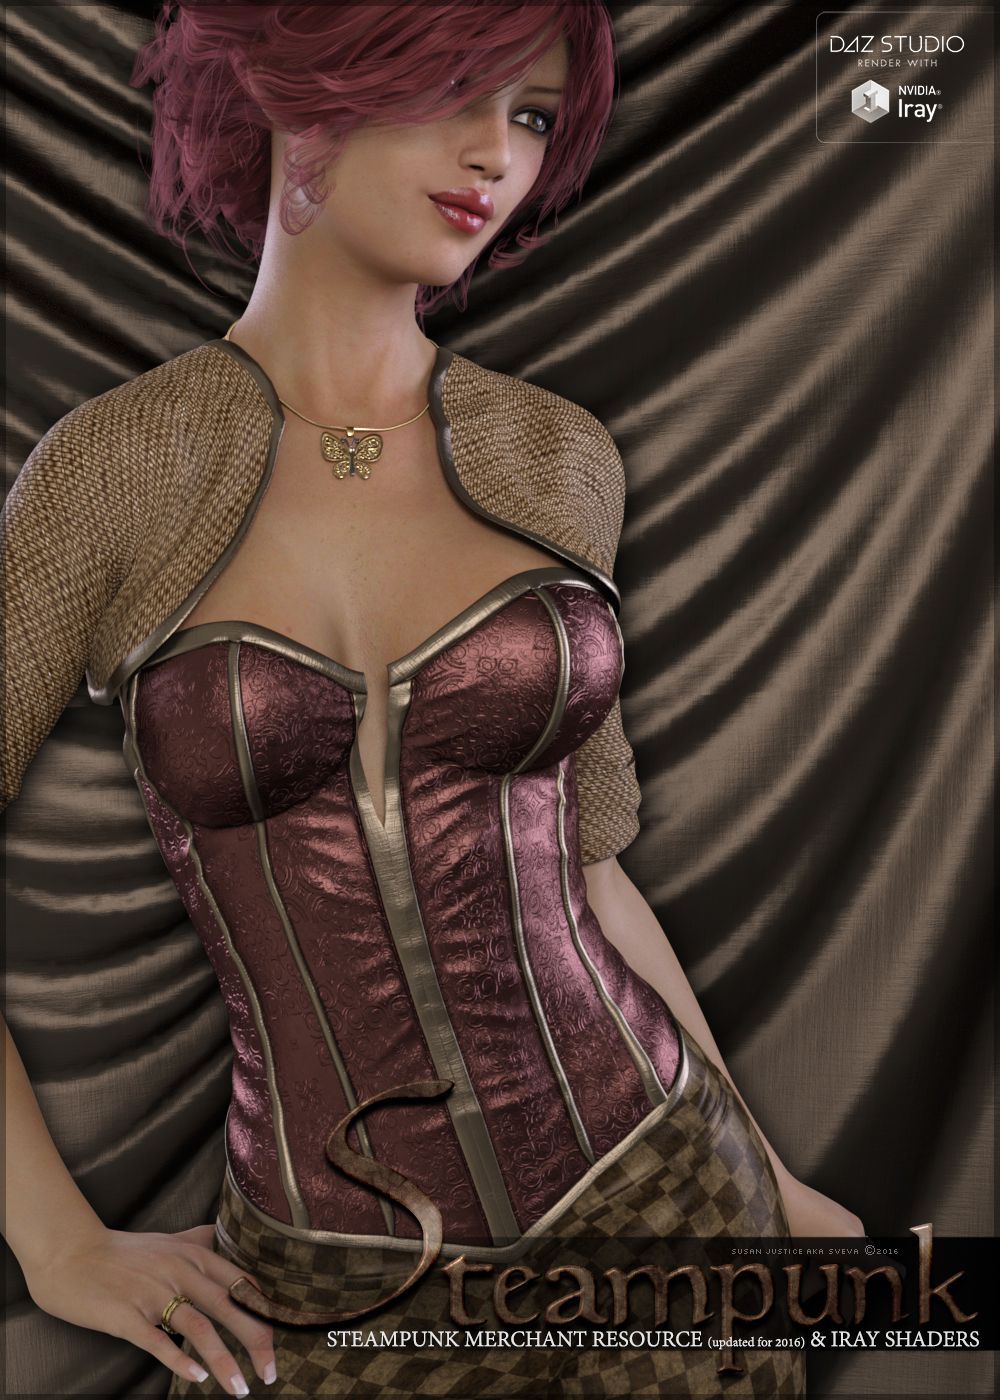 SVs Steampunk Resource and Shaders_DAZ3DDL